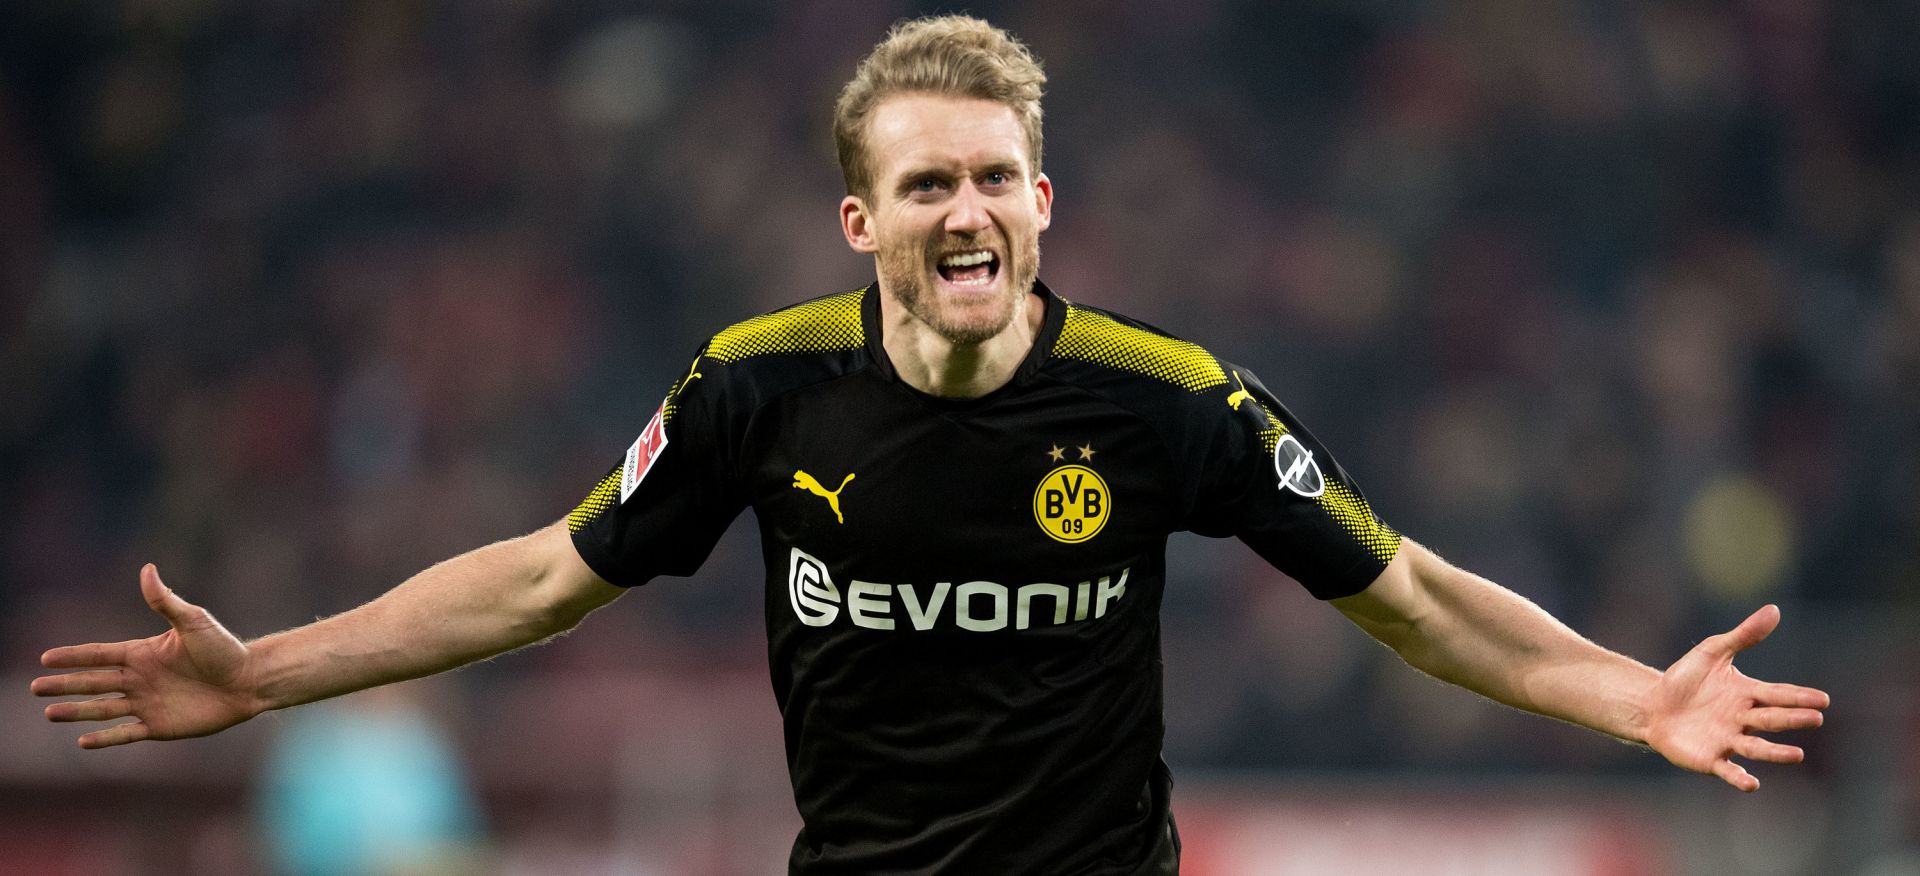 FILED - 02 February 2018, North Rhine-Westphalia, Cologne: Borussia Dortmund's Andre Schuerrle celebrates scoring his side's third goal during the German Bundesliga soccer match between 1. FC Cologne and Borussia Dortmund at the RheinEnergieStadion. German World Cup winner Andre Schuerrle has announced a surprise retirement from football aged just 29. Photo: Marius Becker/dpa